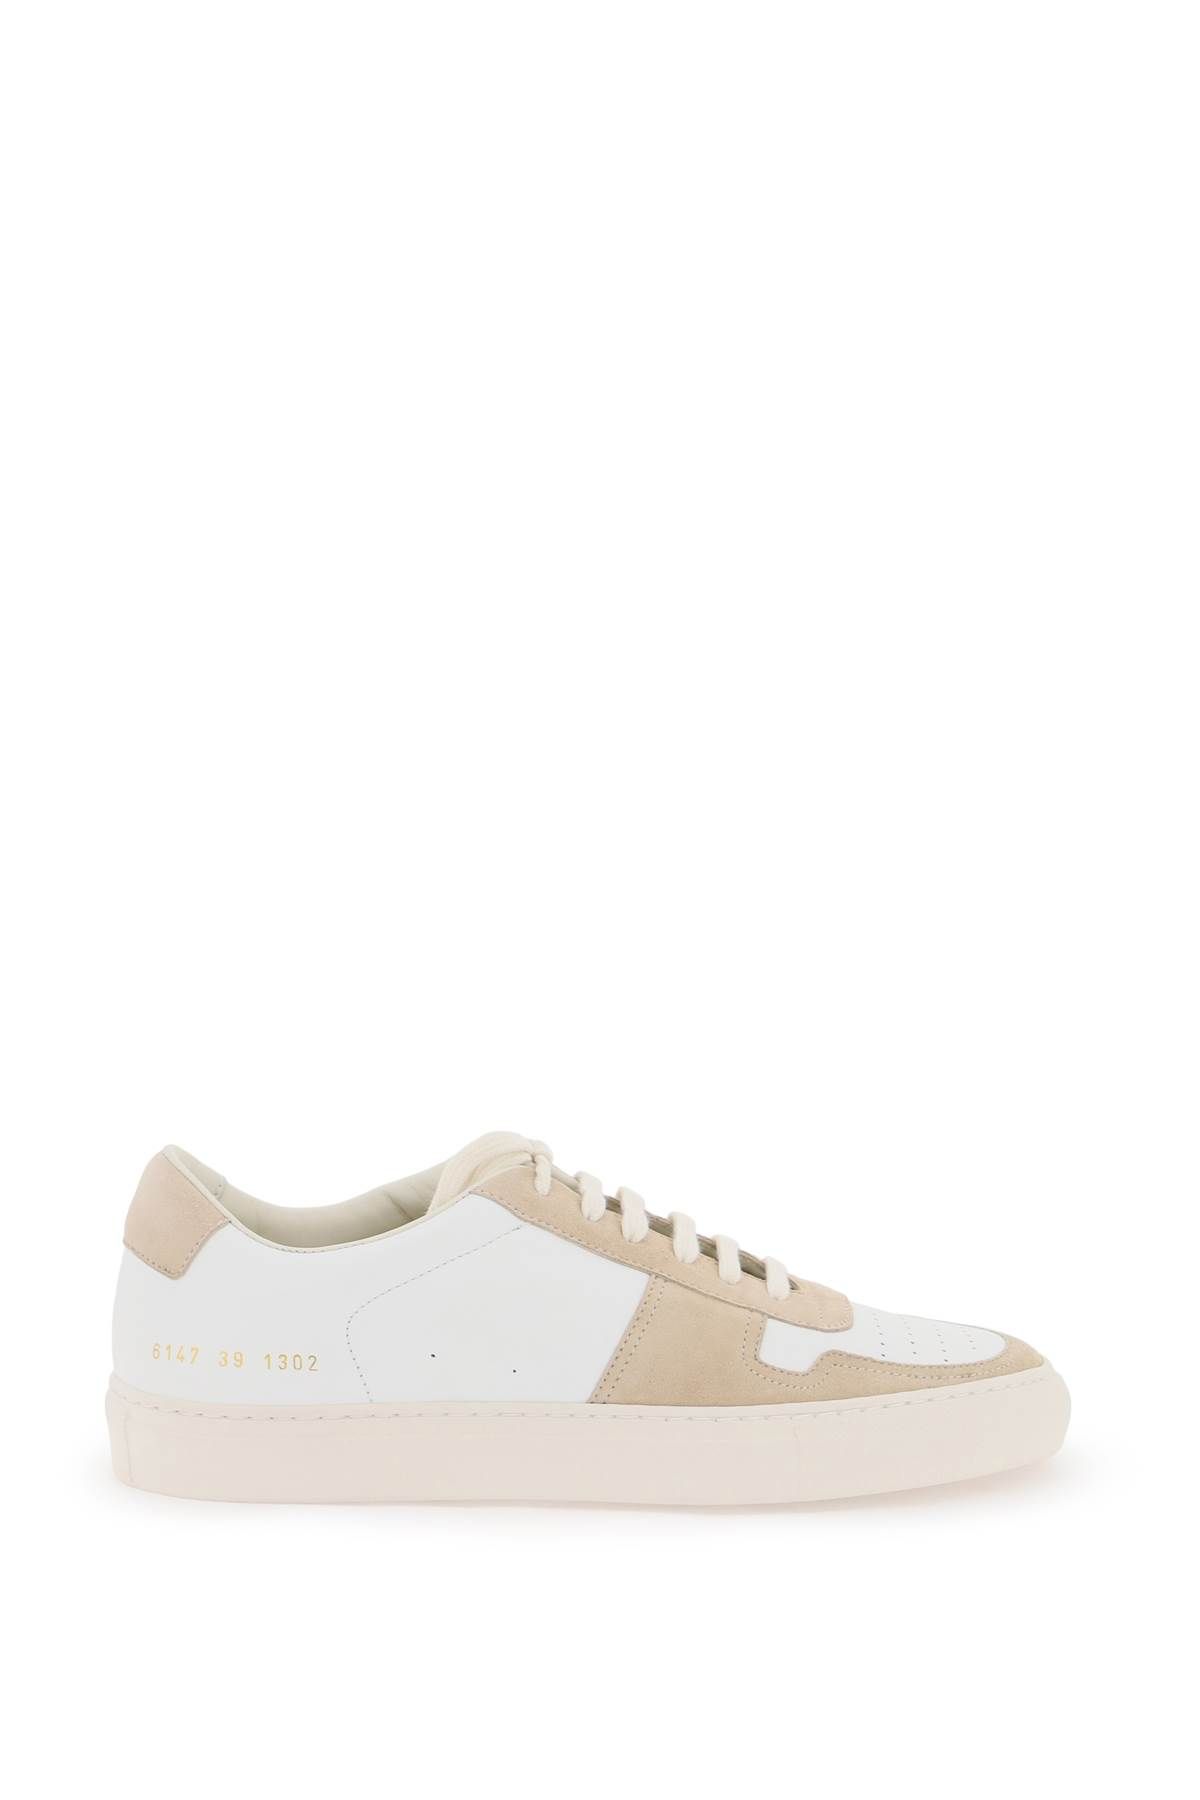 Shop Common Projects Basketball Sneaker In Beige,white